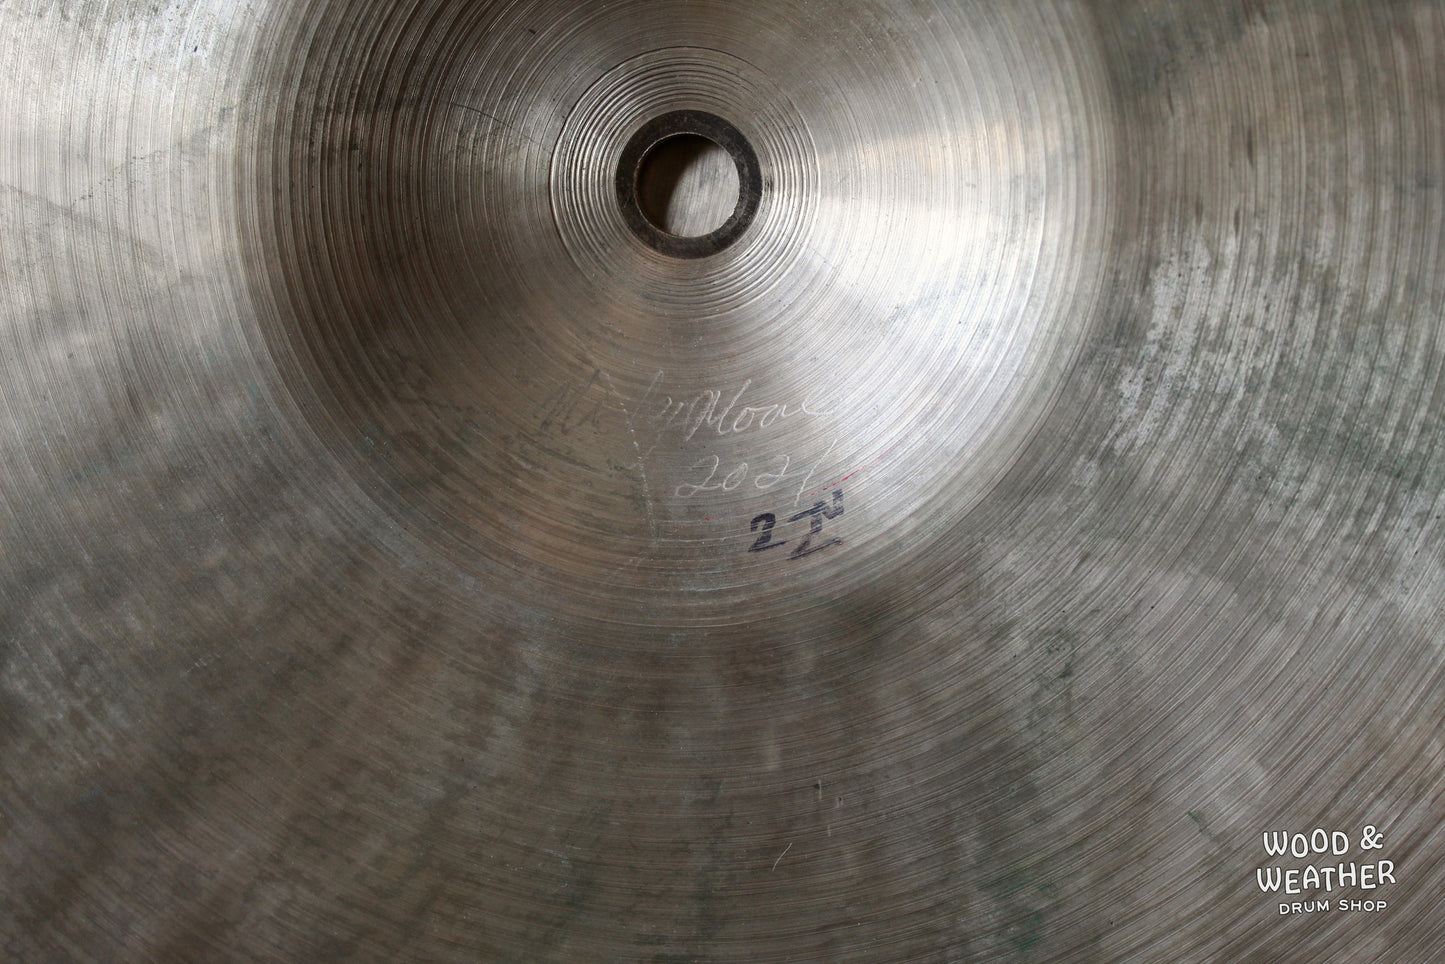 Used Nicky Moon 14" Hi-Hat Cymbals 945/1280g